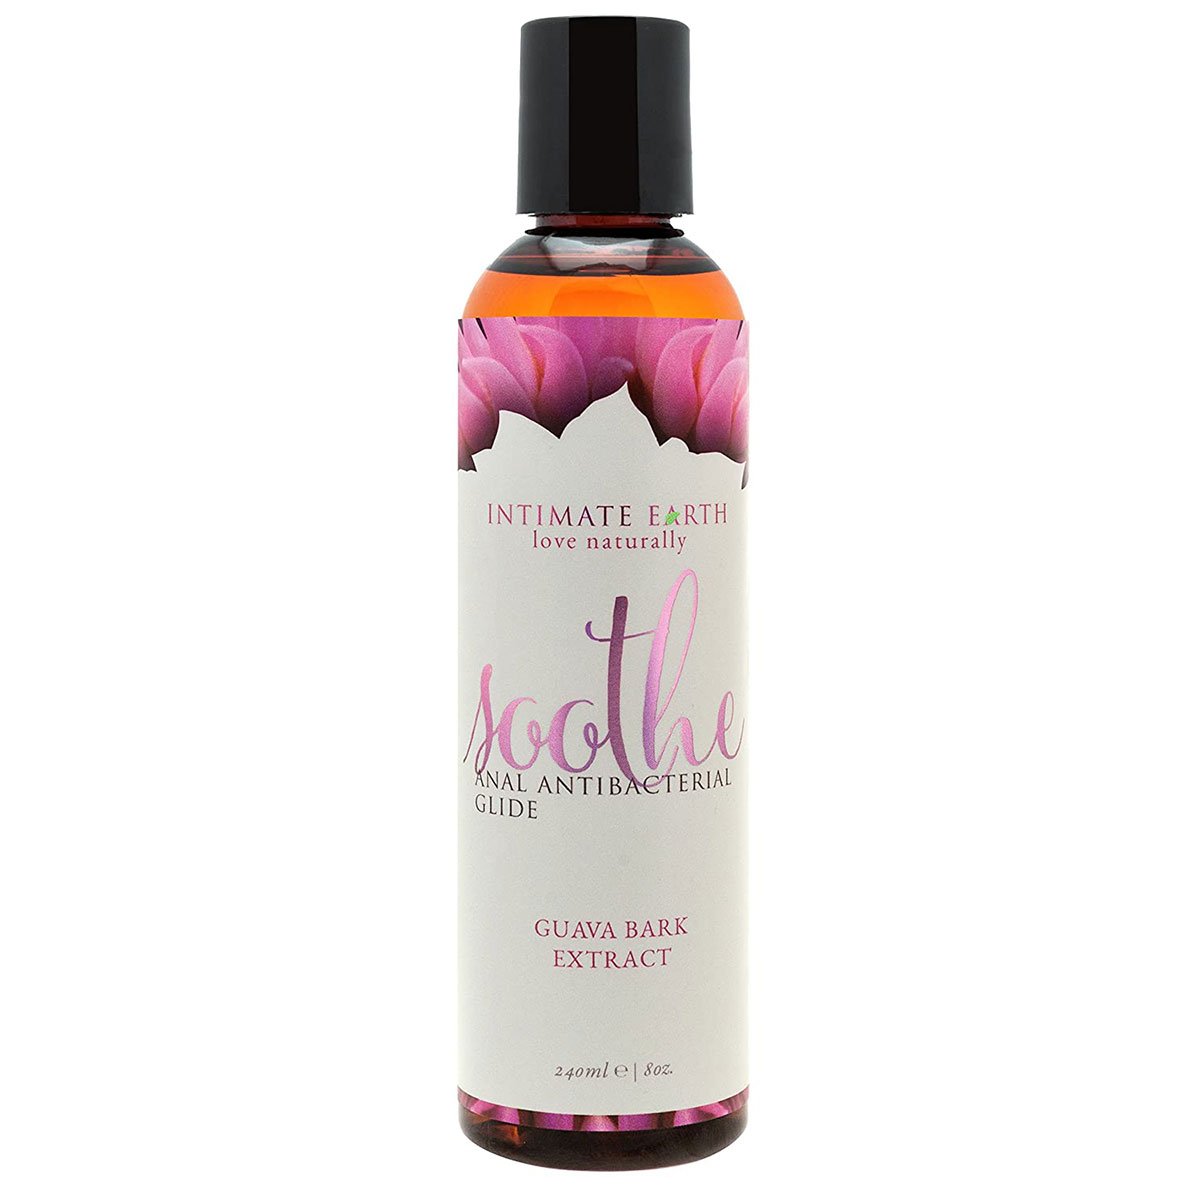 Intimate Earth Soothe 8oz - Buy At Luxury Toy X - Free 3-Day Shipping